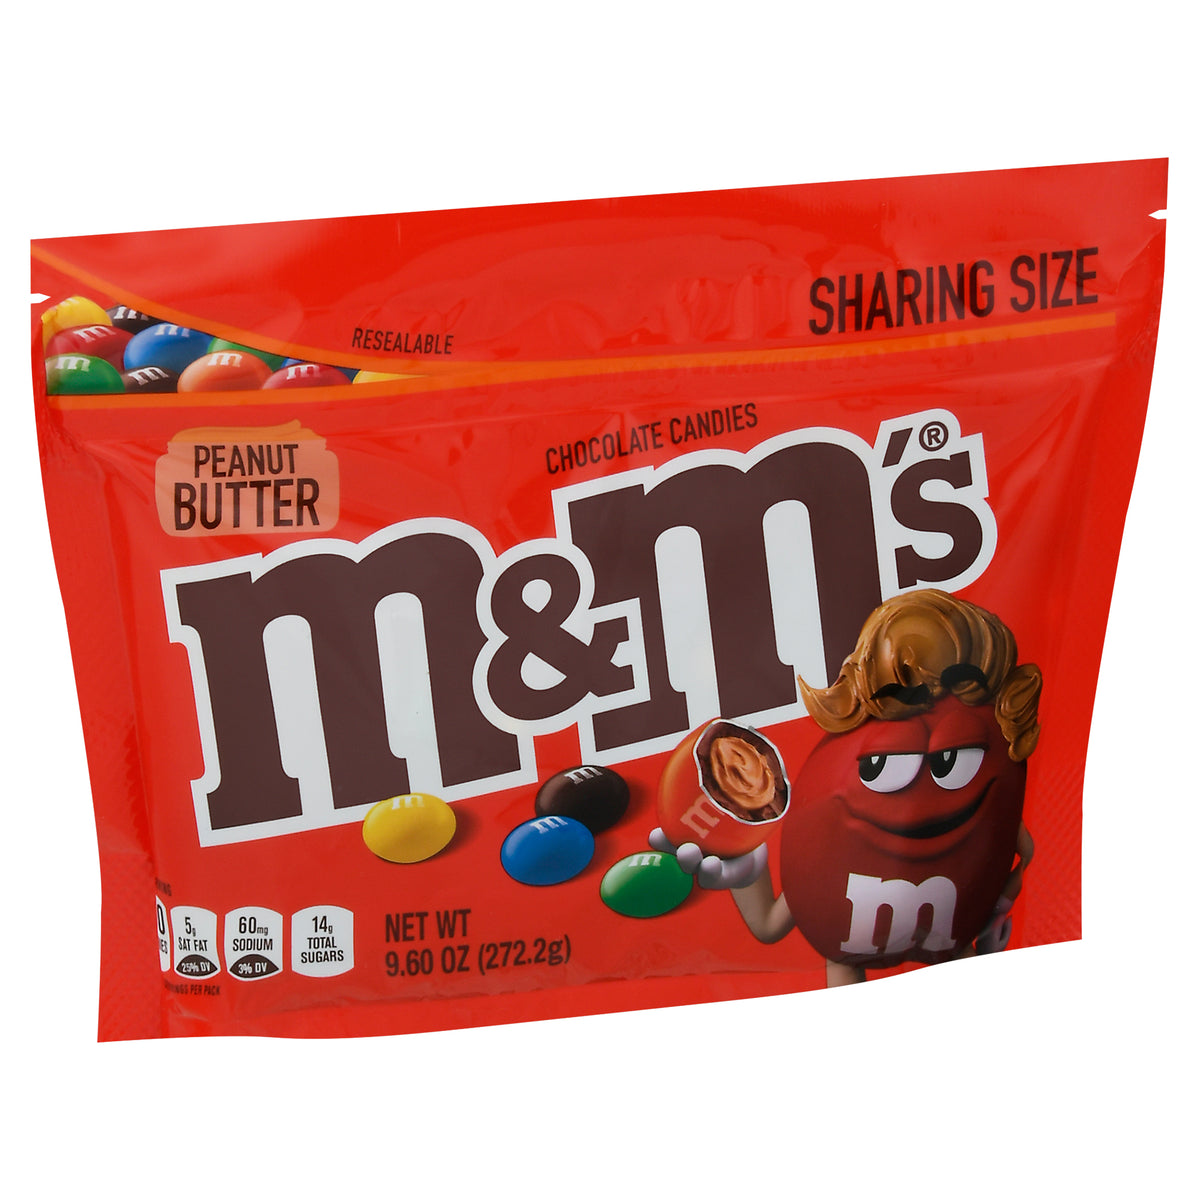 Save on M&M's Peanut Butter Chocolate Candies Eggs Order Online Delivery